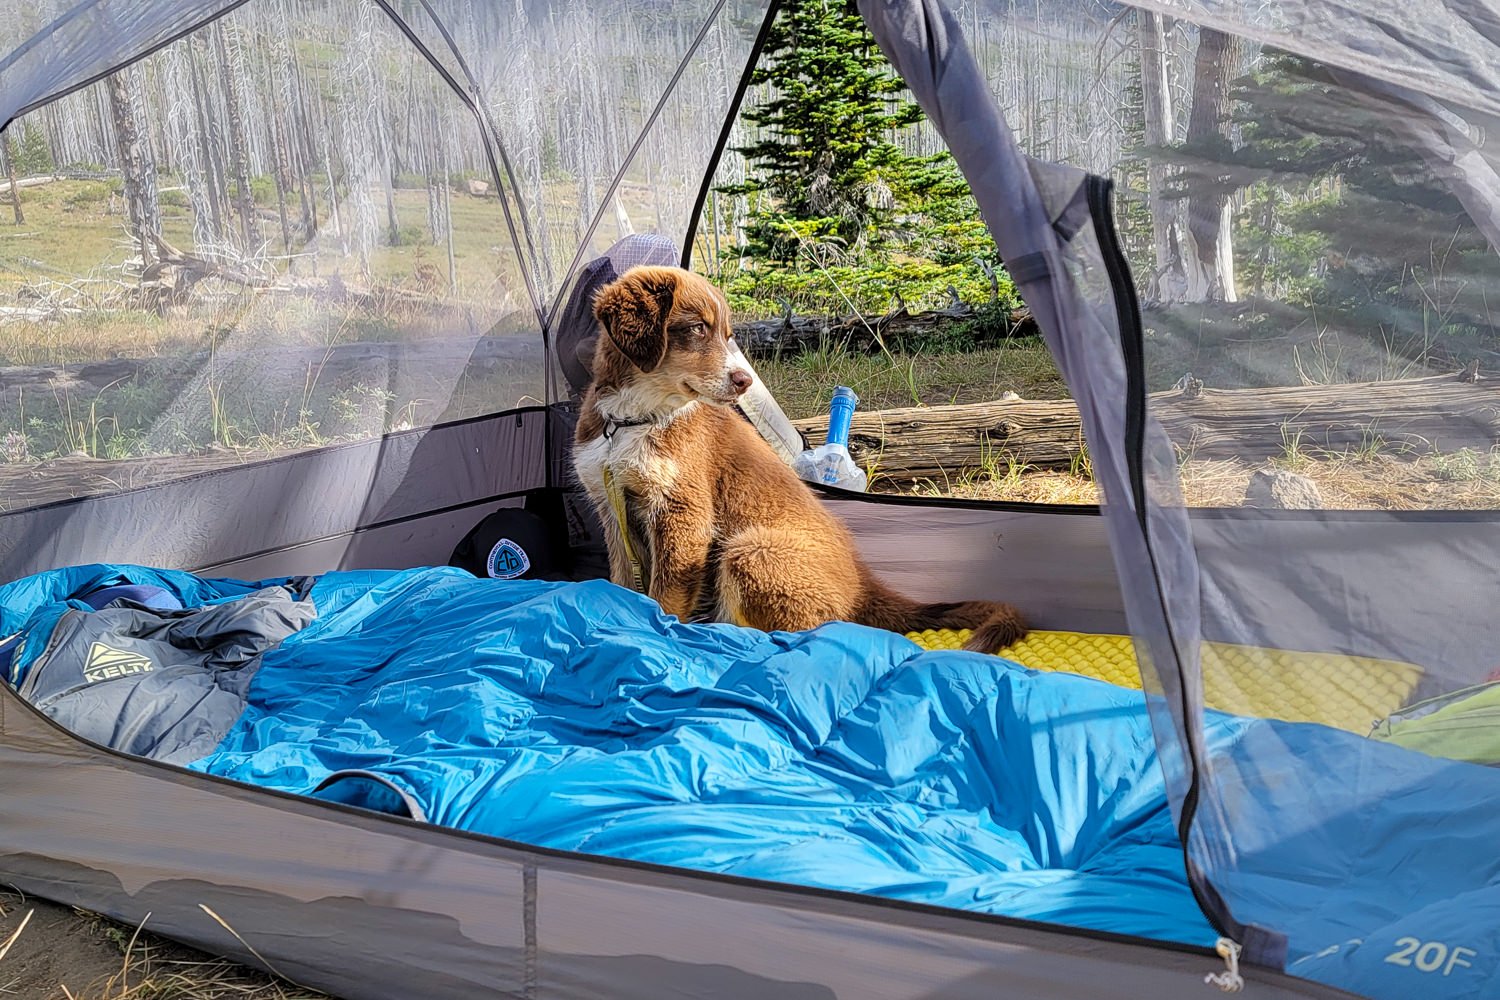 A puppy next to the Kelty Cosmic Down 20 sleeping bag in a backpacking tent